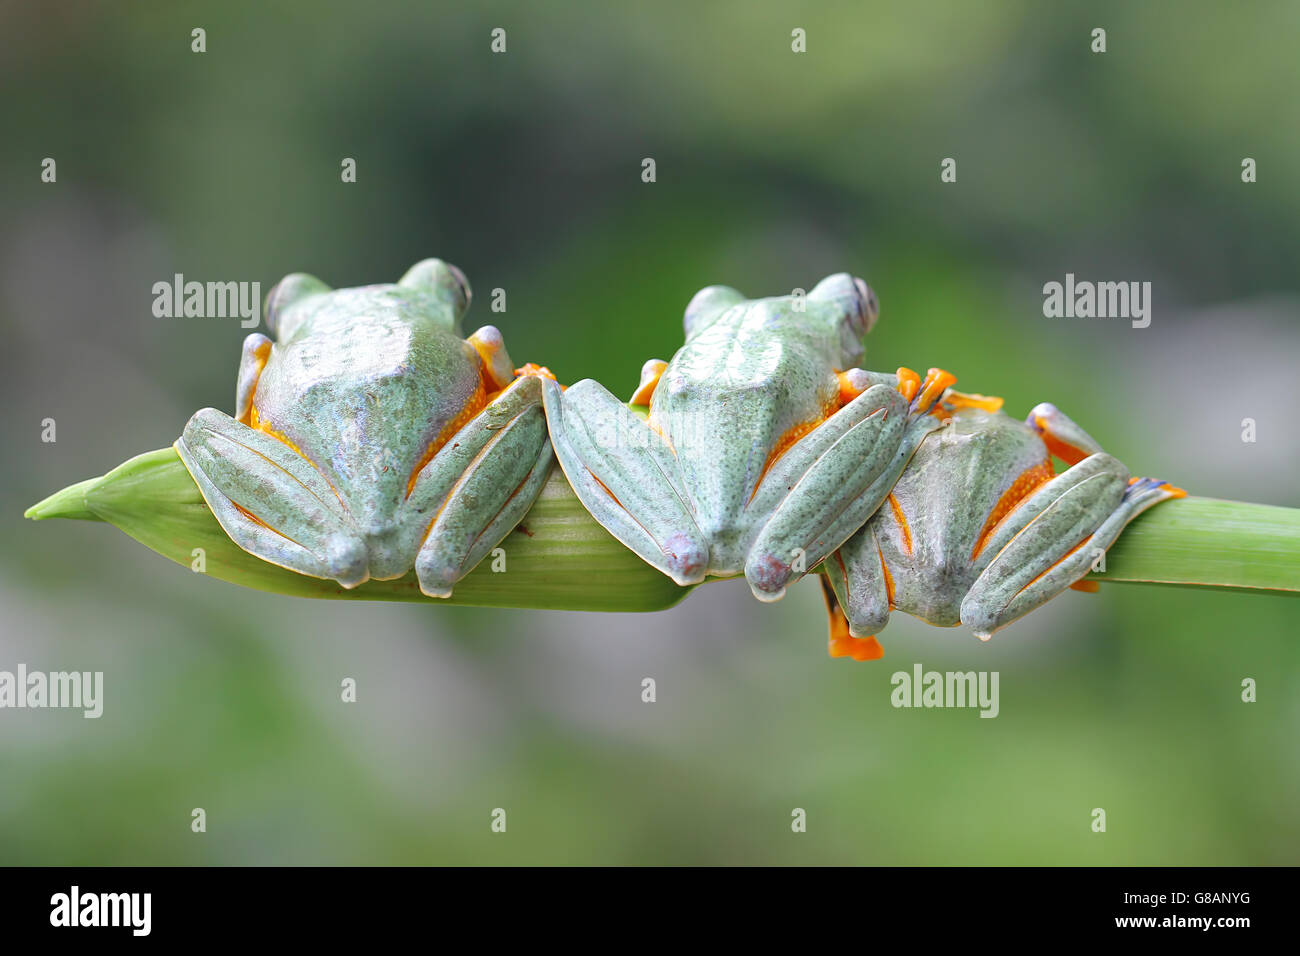 Three javan gliding Tree frogs sitting in a row, Indonesia Stock Photo